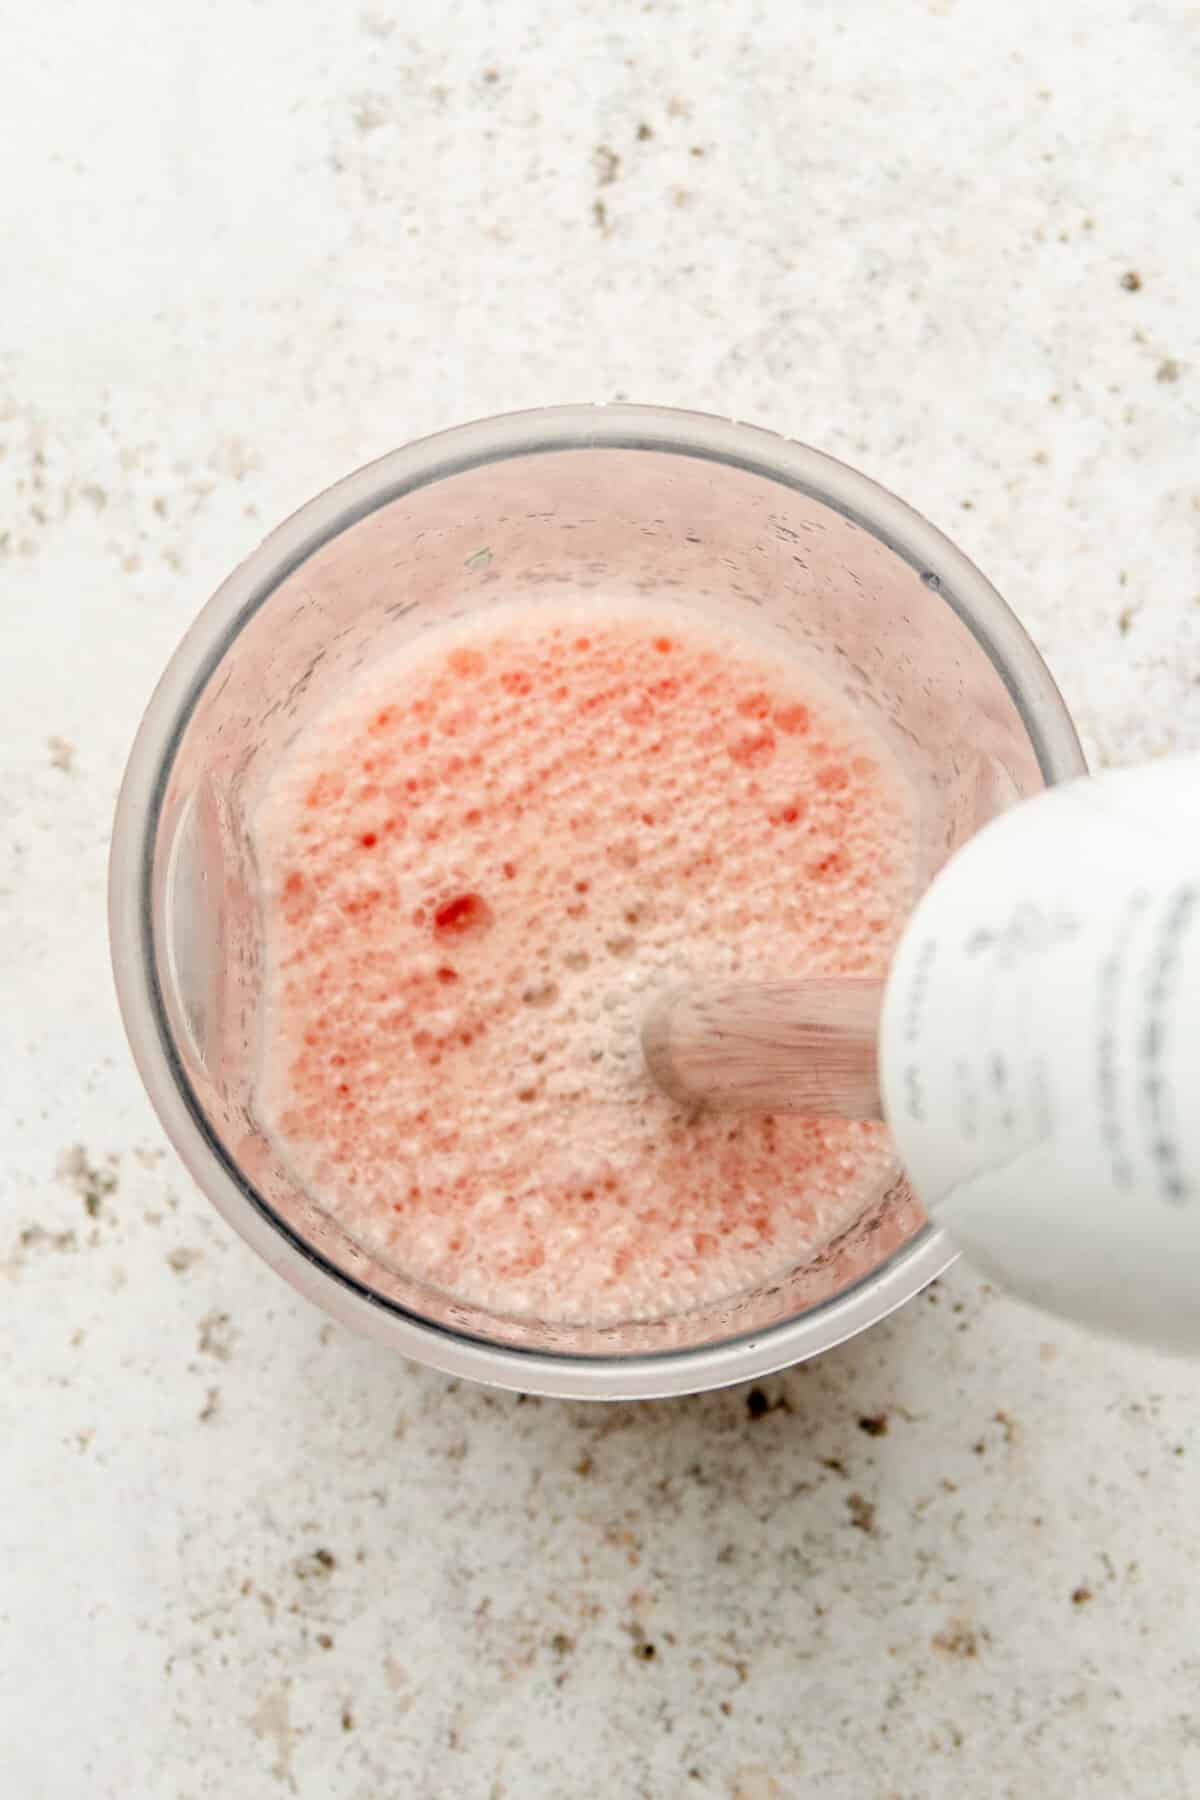 Watermelon and lime juice are blended in a beaker on a light grey surface.